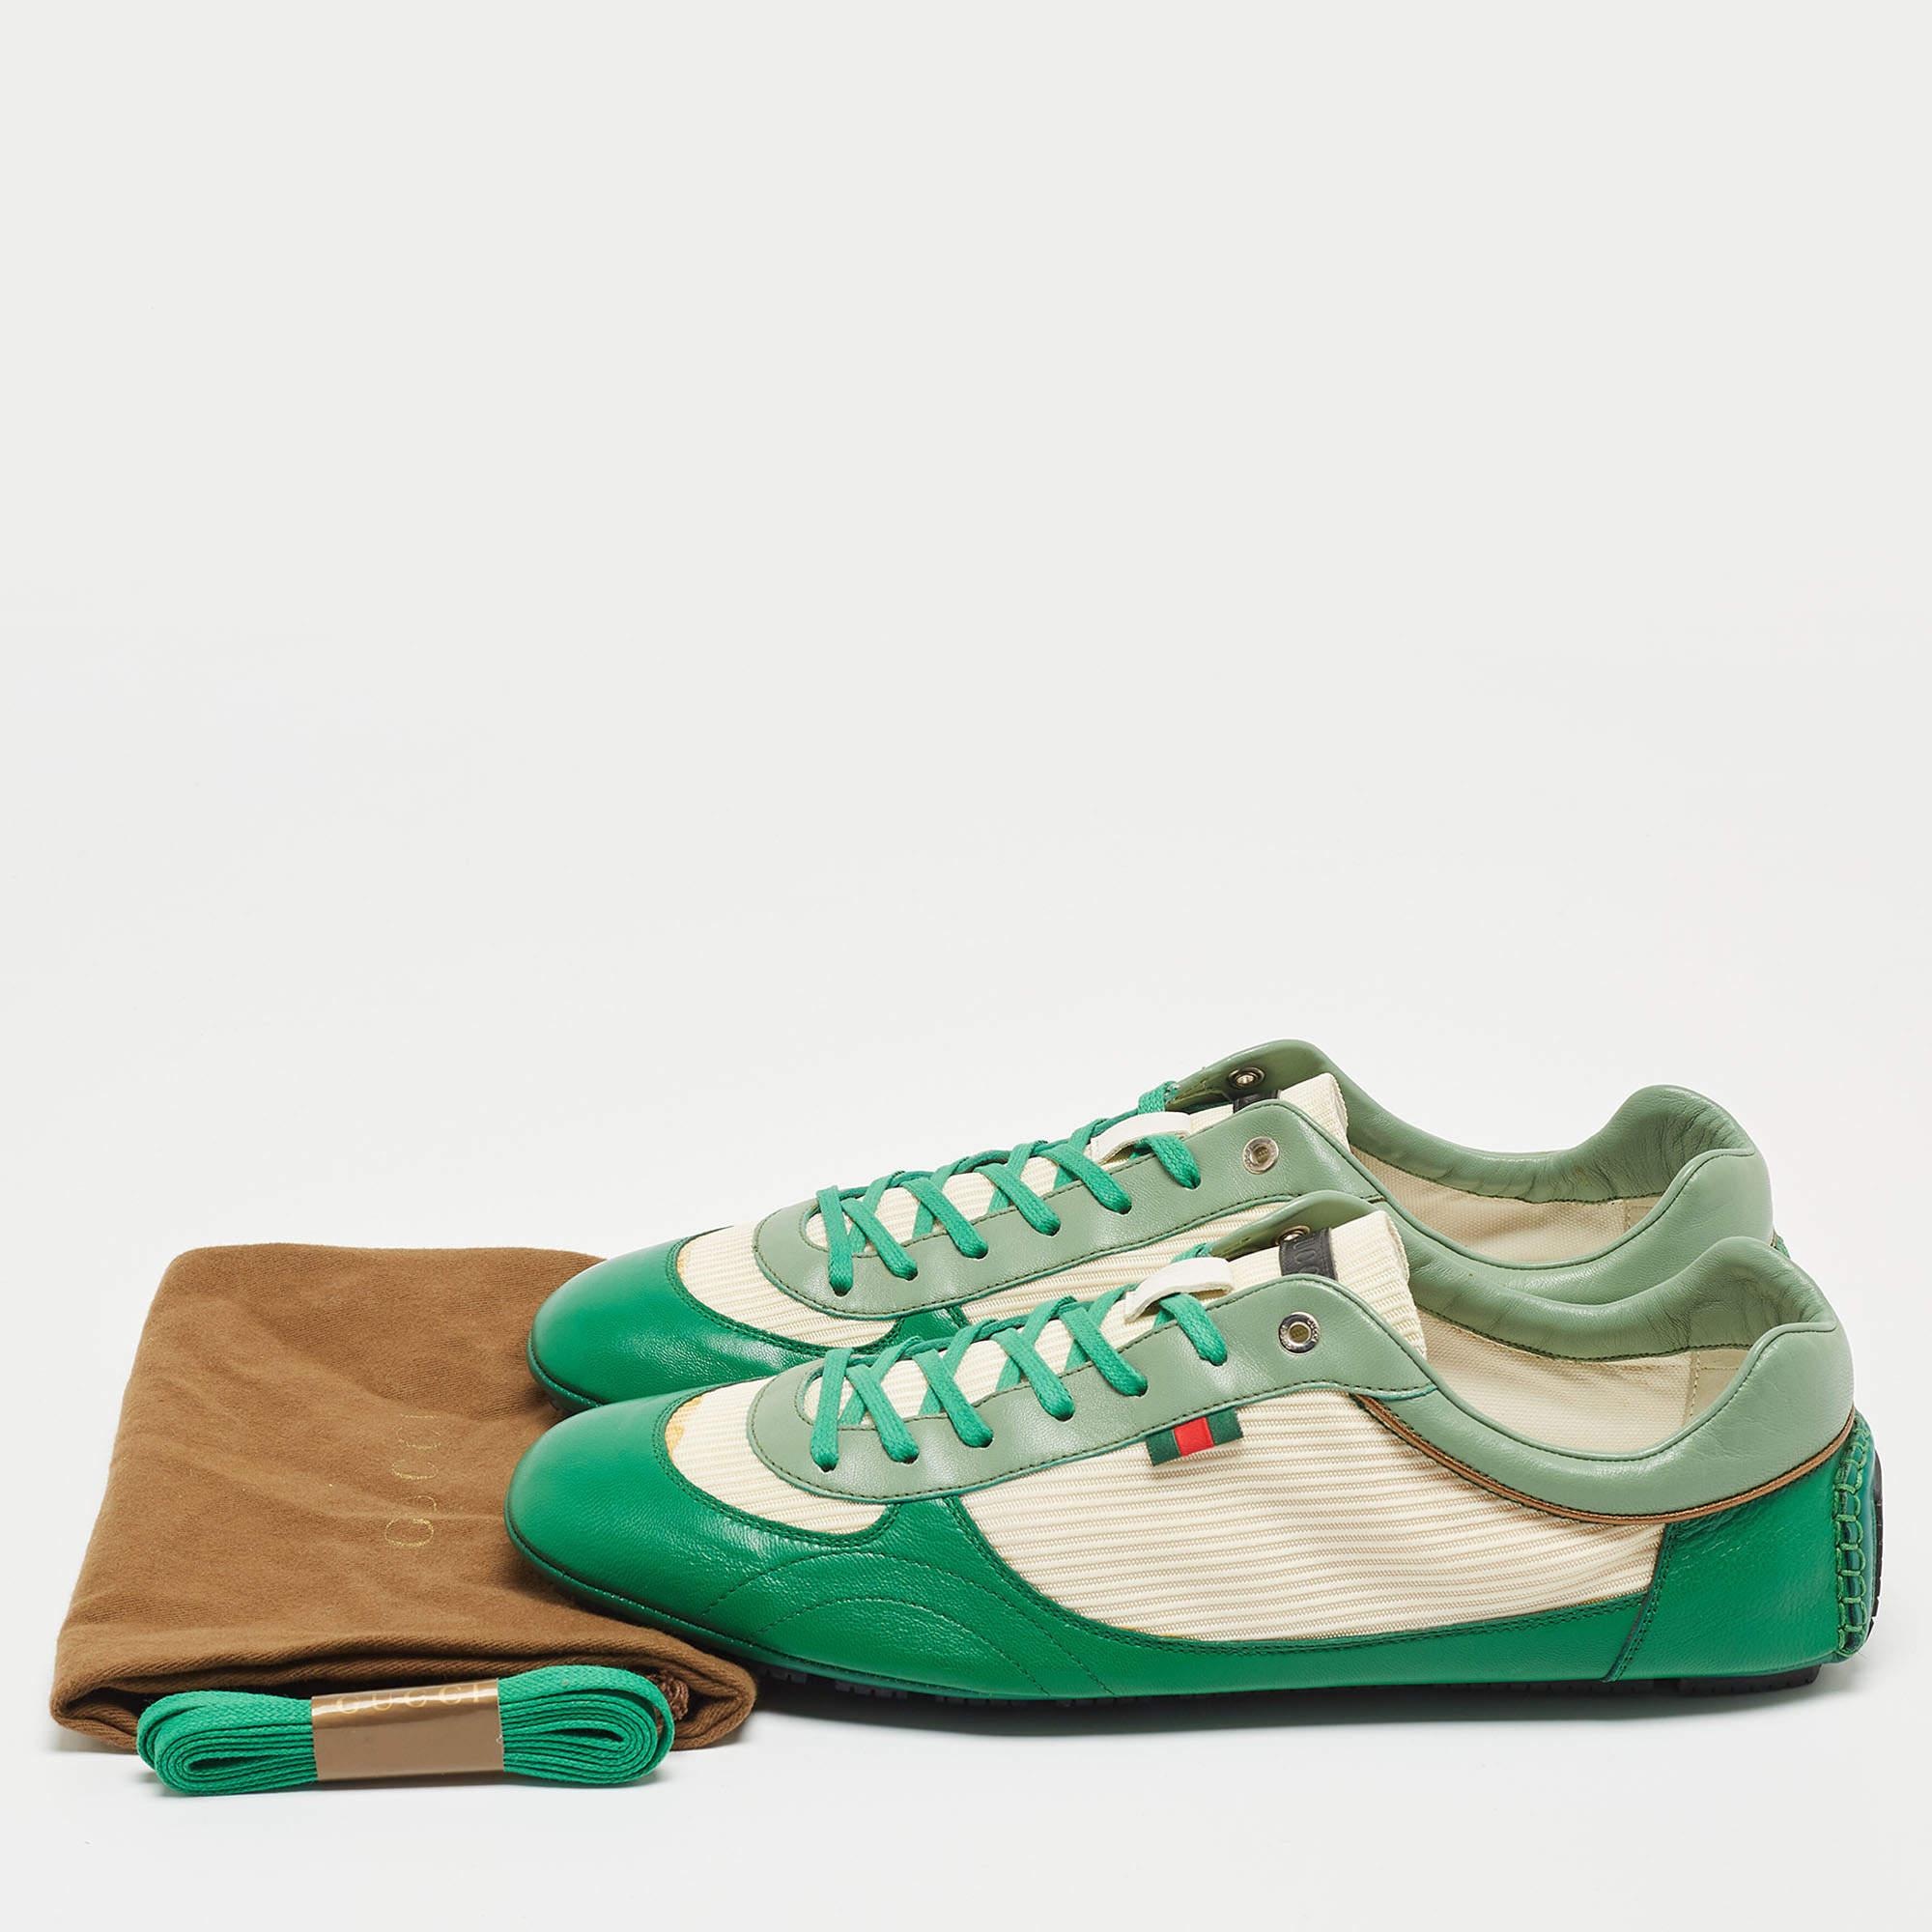 Gucci Green/White Leather and Fabric Low Top Sneakers Size 45.5 3